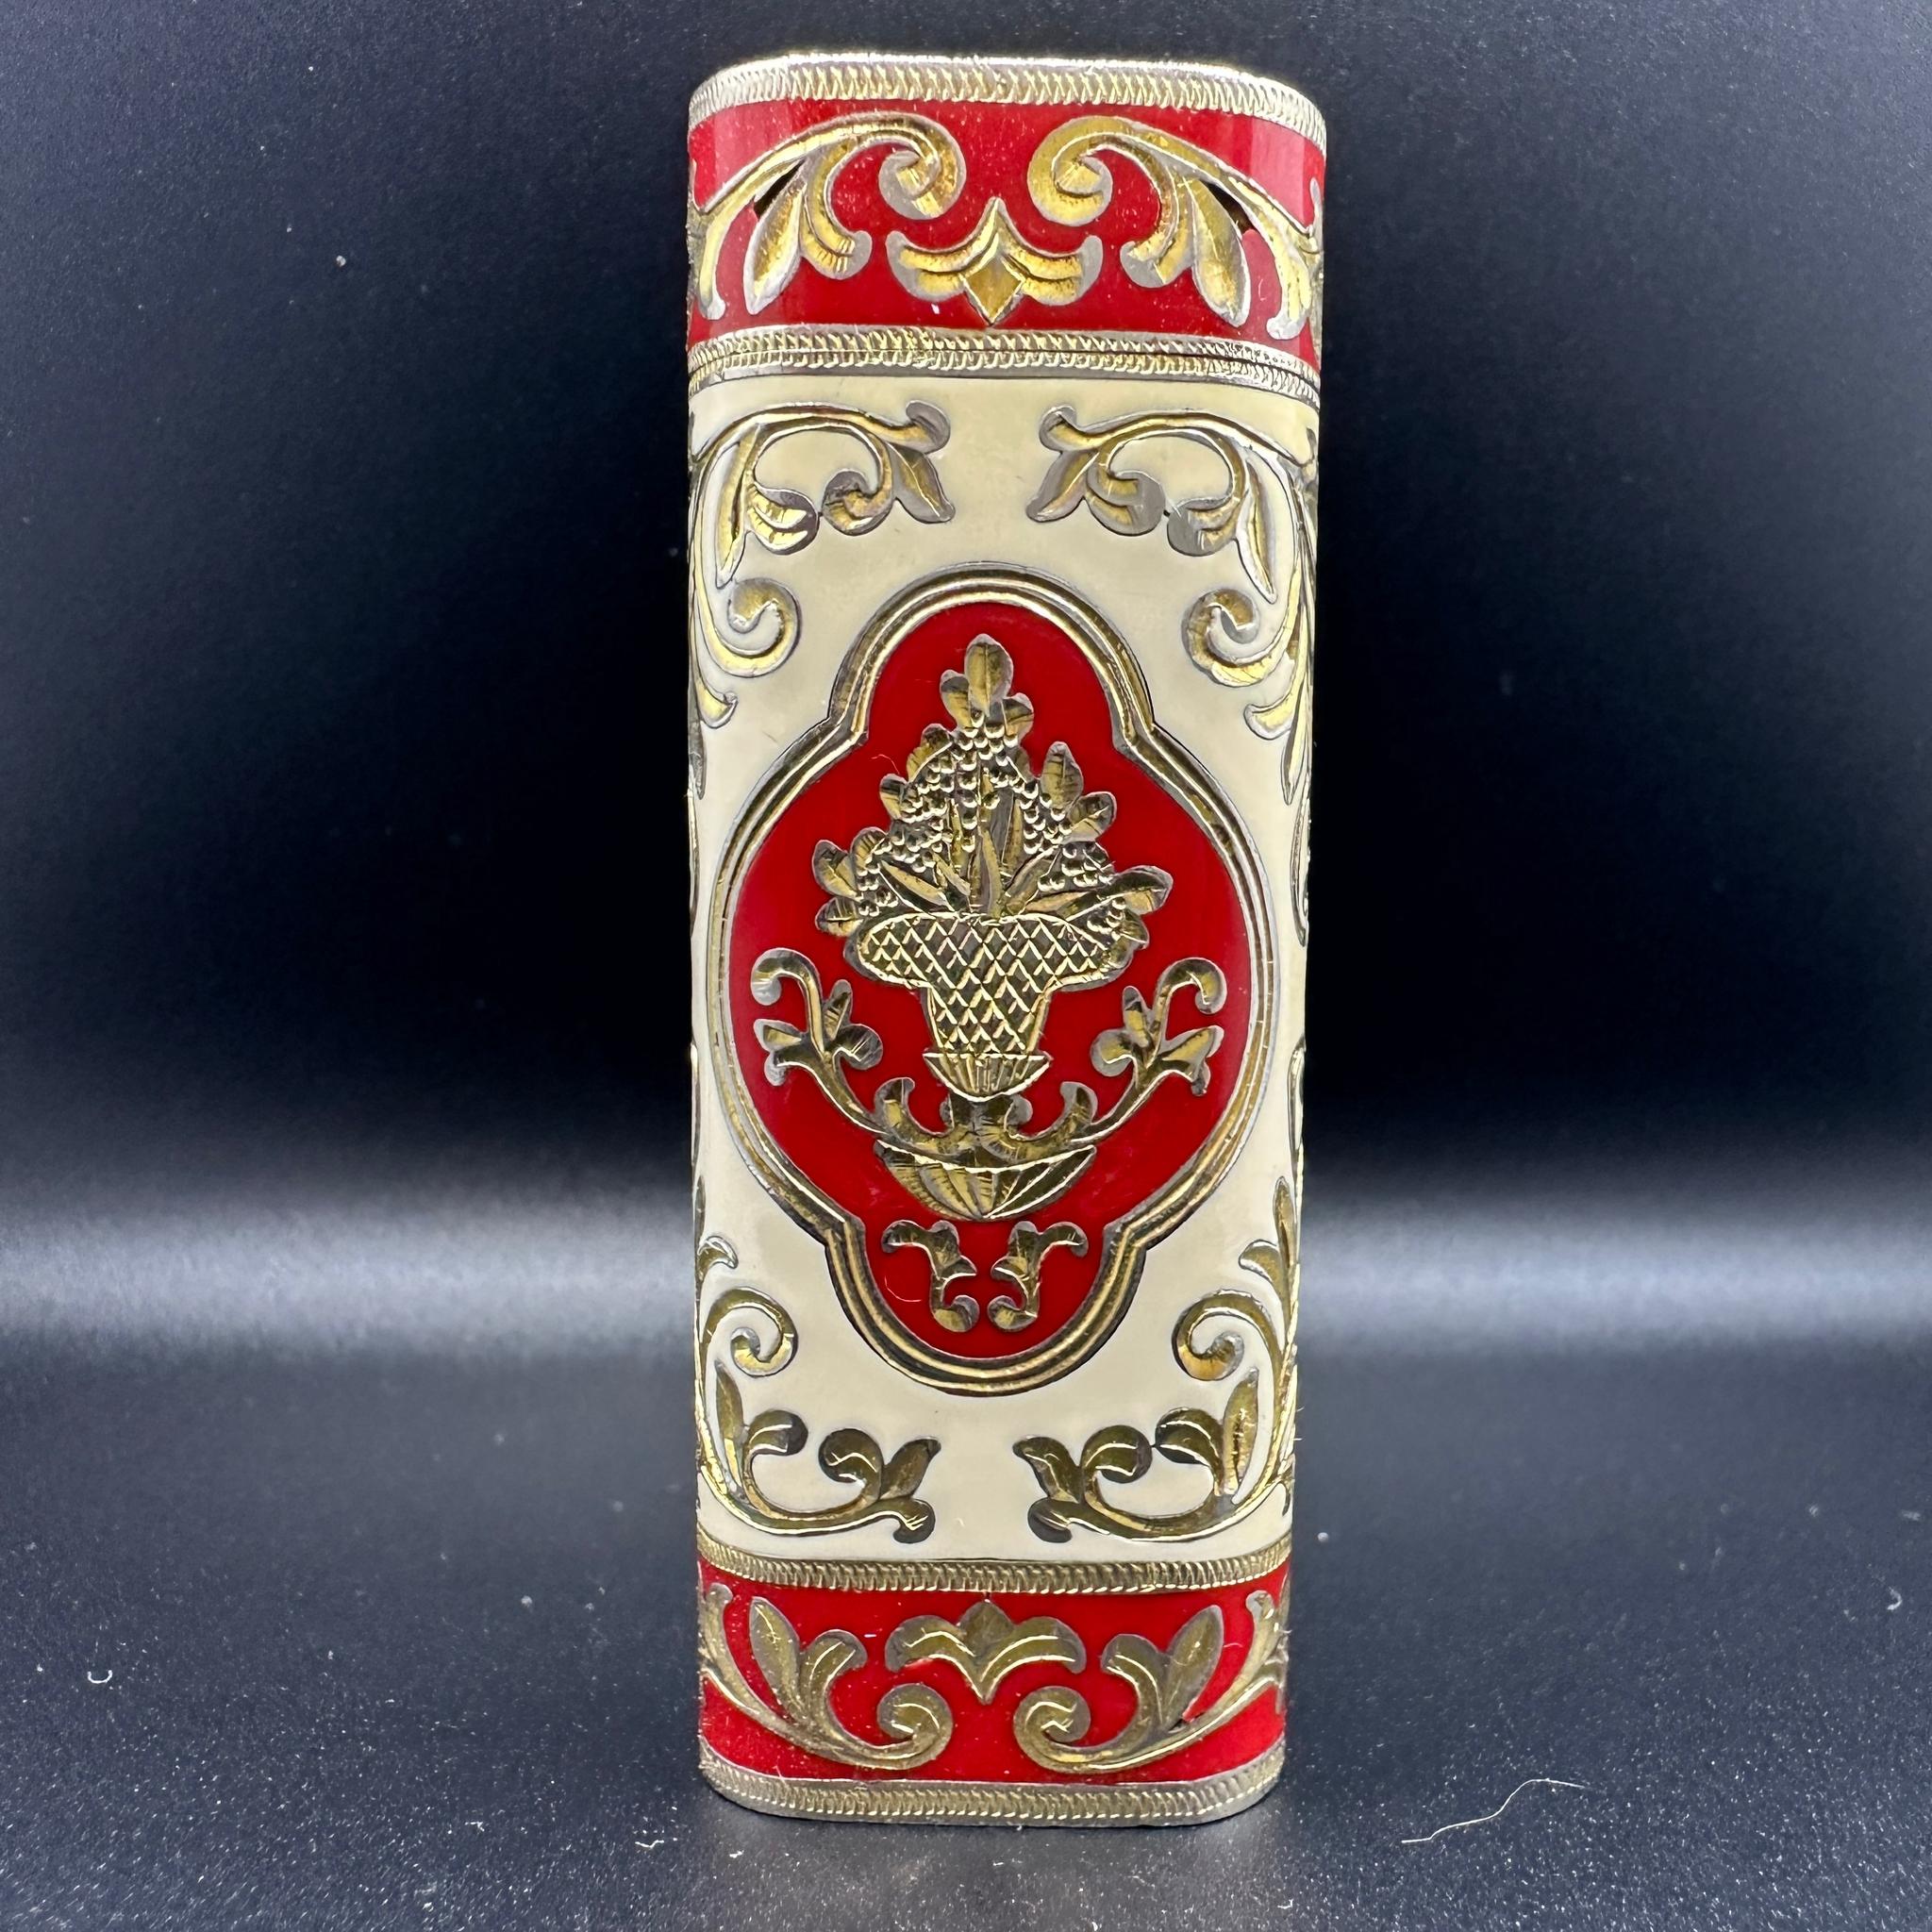 Cartier Roy king lighter.
CARTIER  Roy King Rollagas, a Unique RARE example of a ROY KING designed Cartier Rollagas lighter made circa 1970's, Gold with Red and cream shaped Baroque  lacquer, mint condition.
Roy King emblem on top side part of